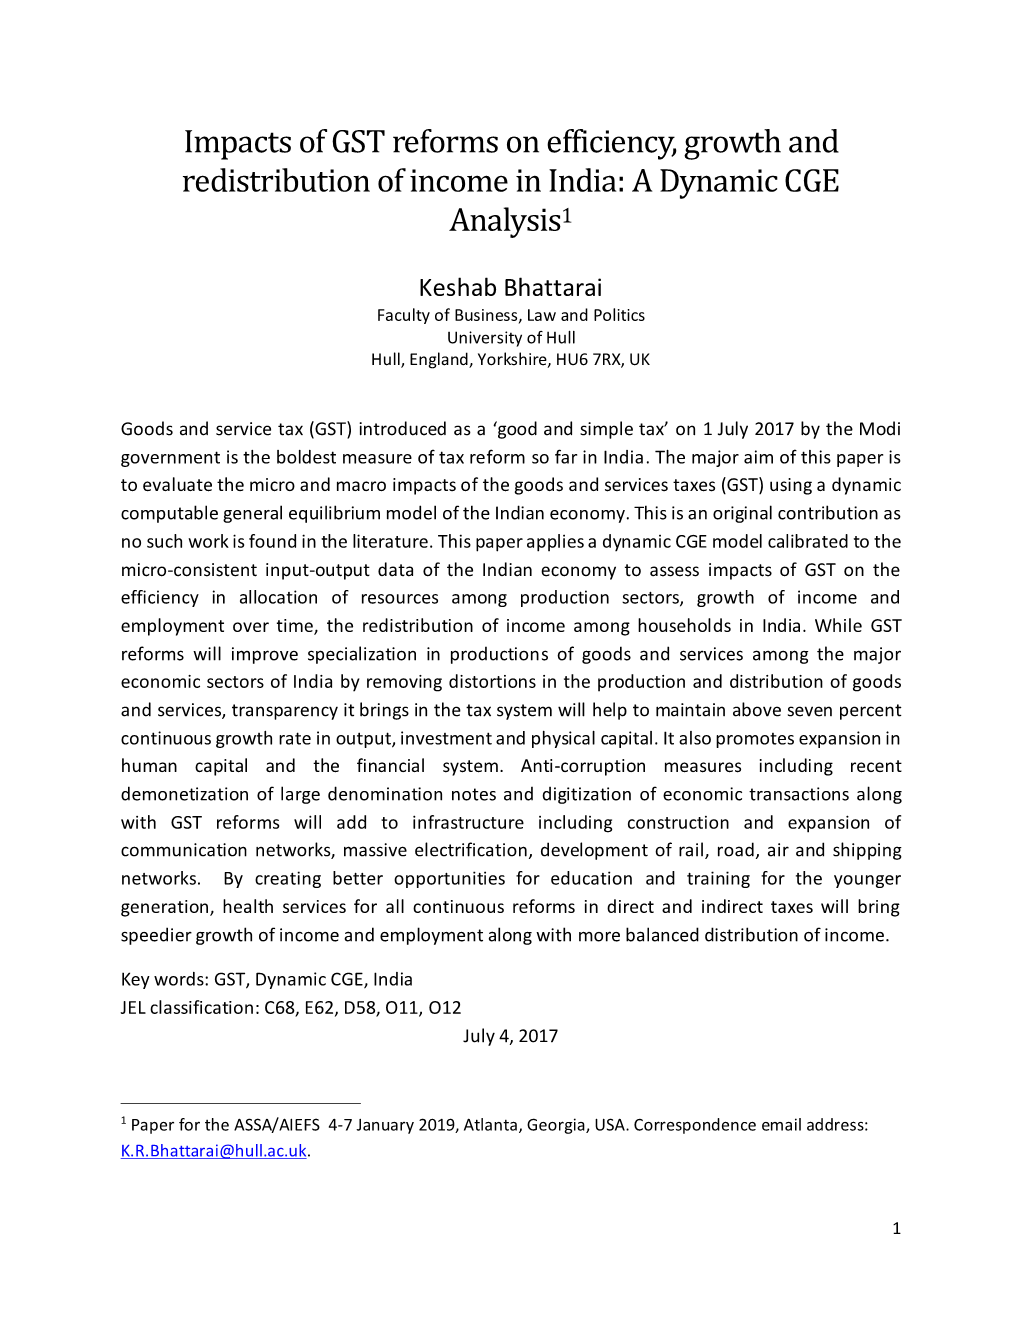 Impacts of GST Reforms on Efficiency, Growth and Redistribution of Income in India: a Dynamic CGE Analysis1